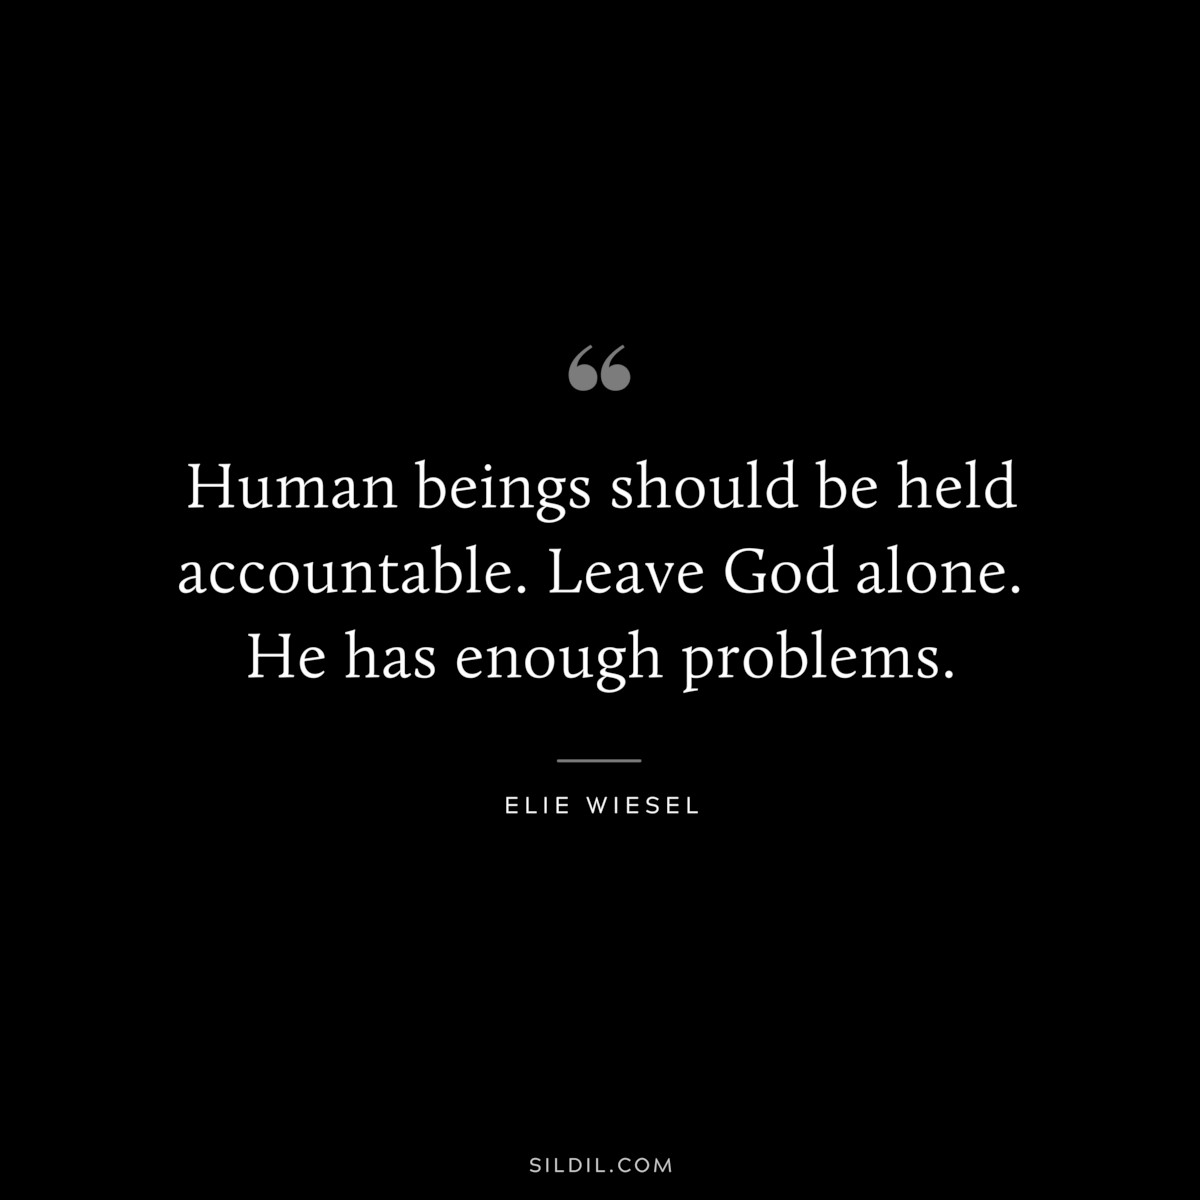 Human beings should be held accountable. Leave God alone. He has enough problems. ― Elie Wiesel